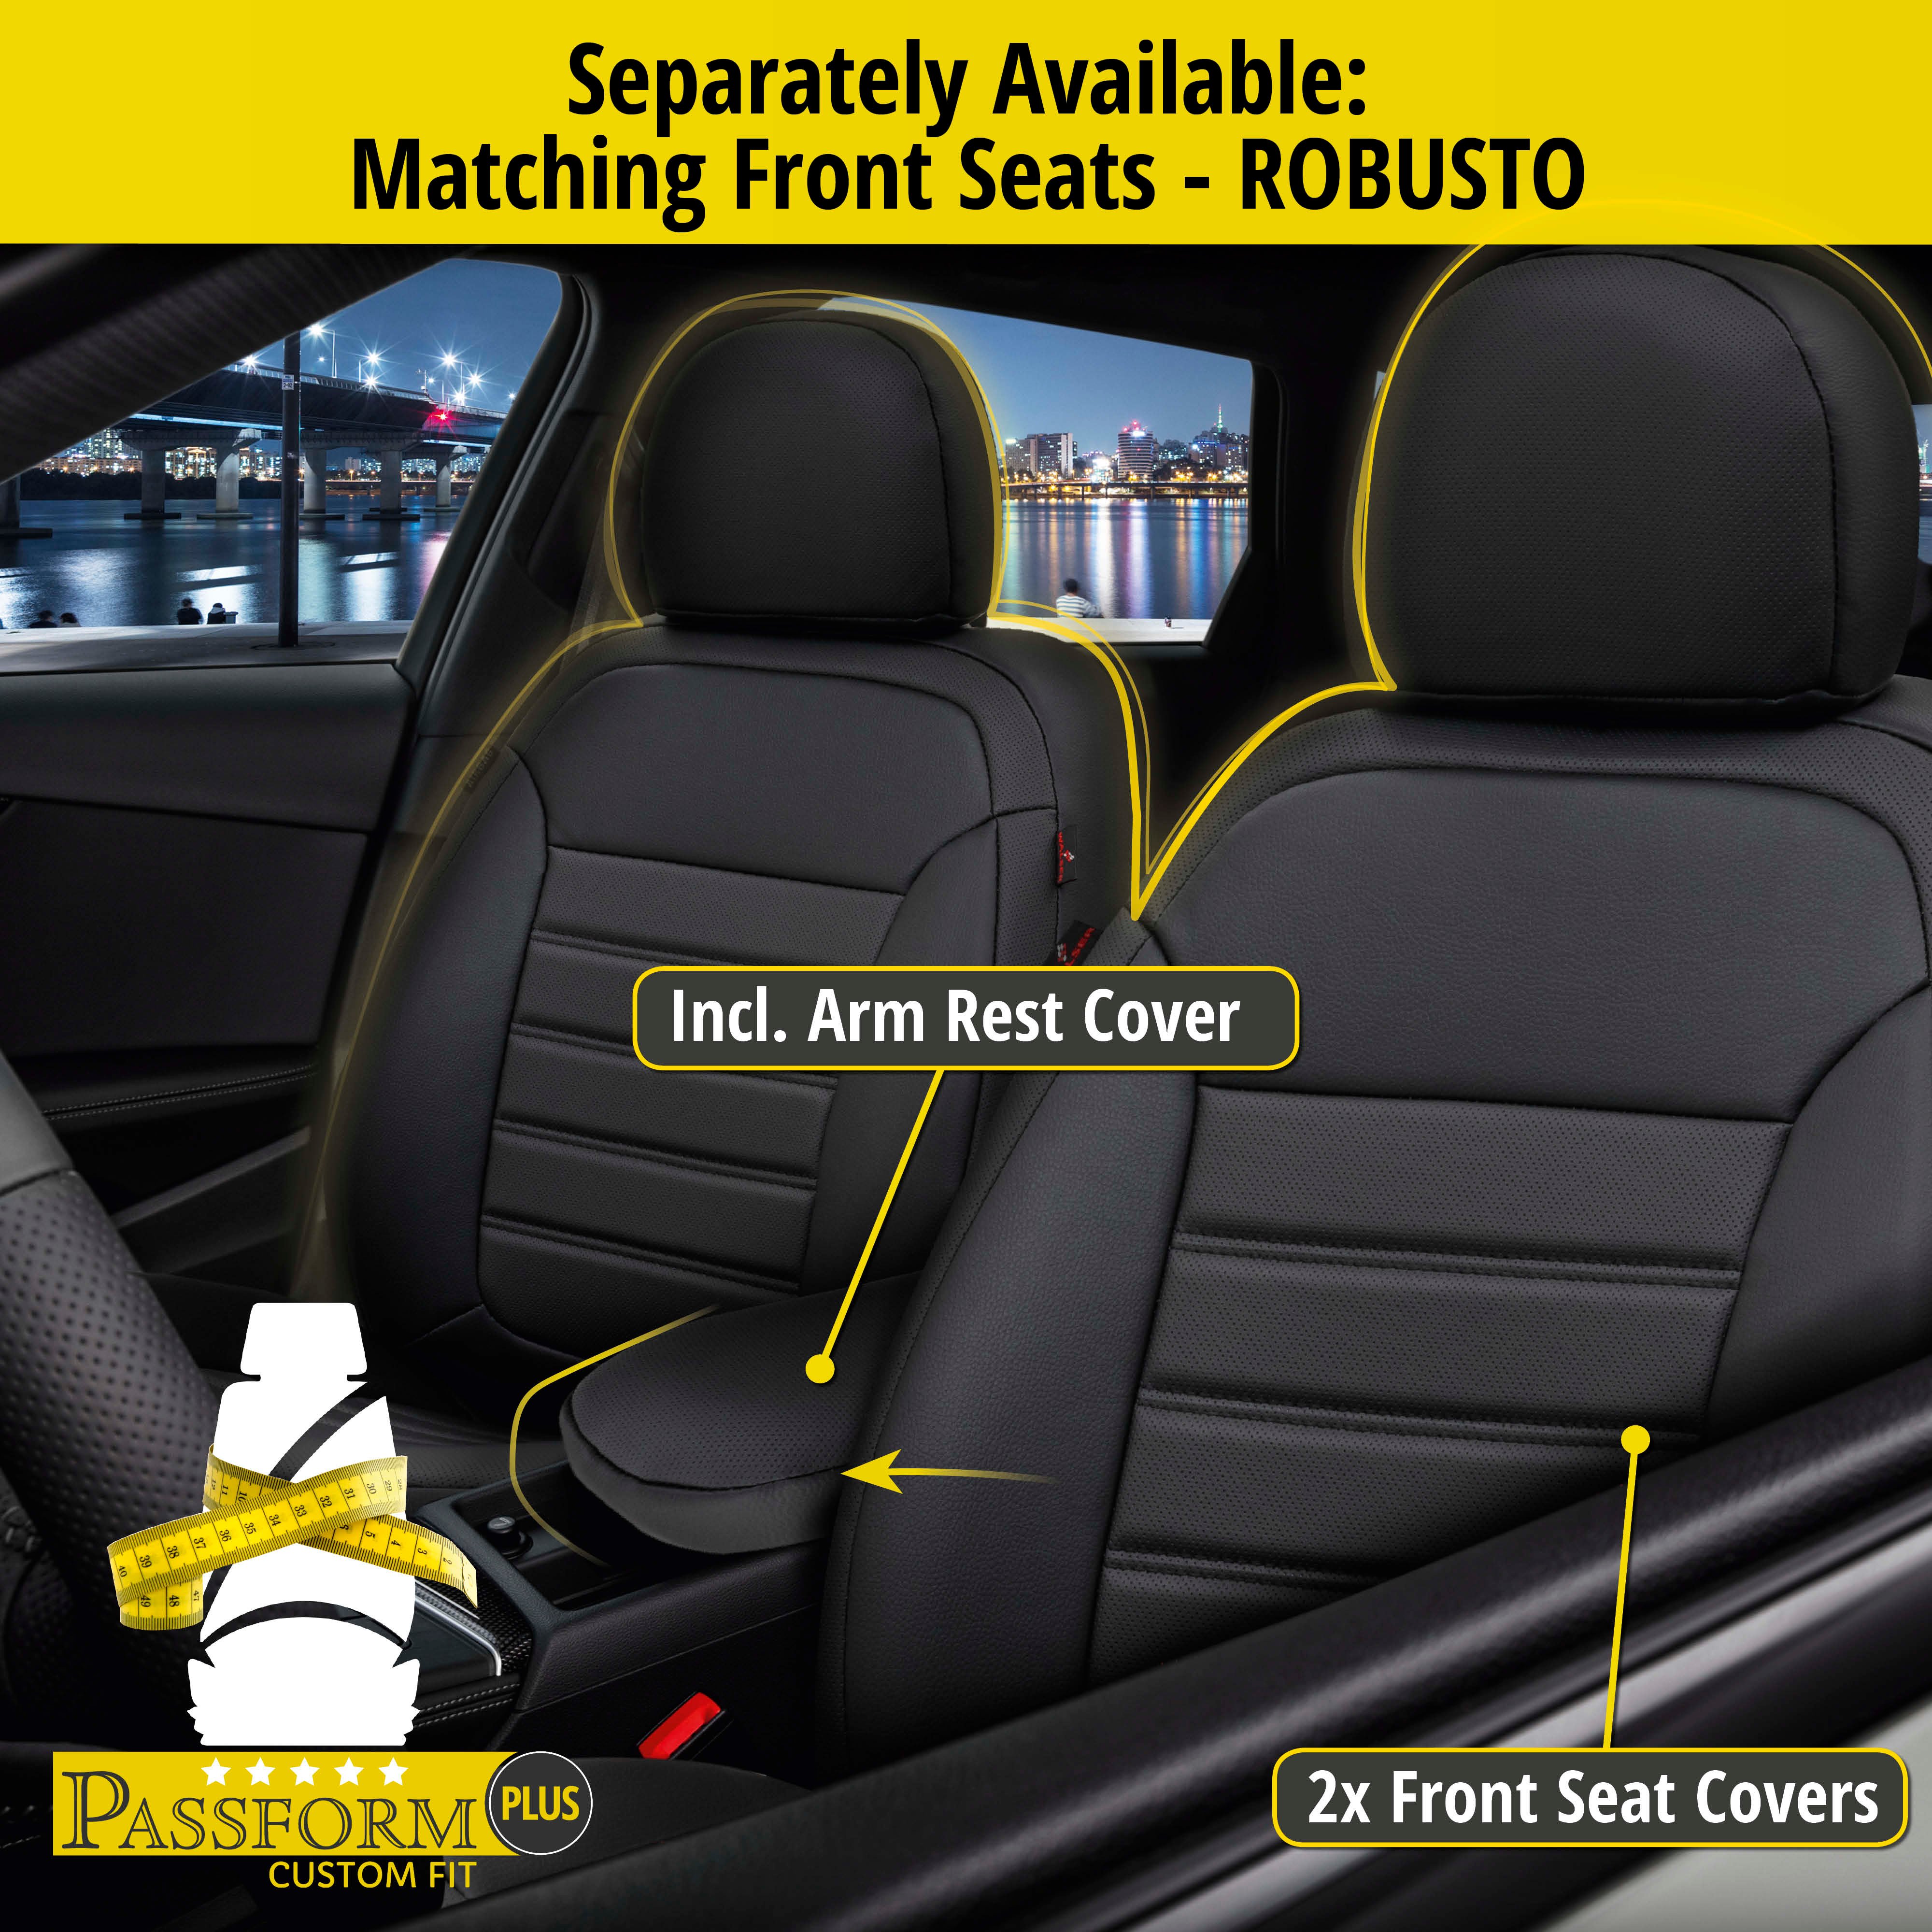 Seat Cover Robusto for Opel Zafira/Zafira Family B A05 07/2005-05/2019, 1 rear seat cover for normal seats